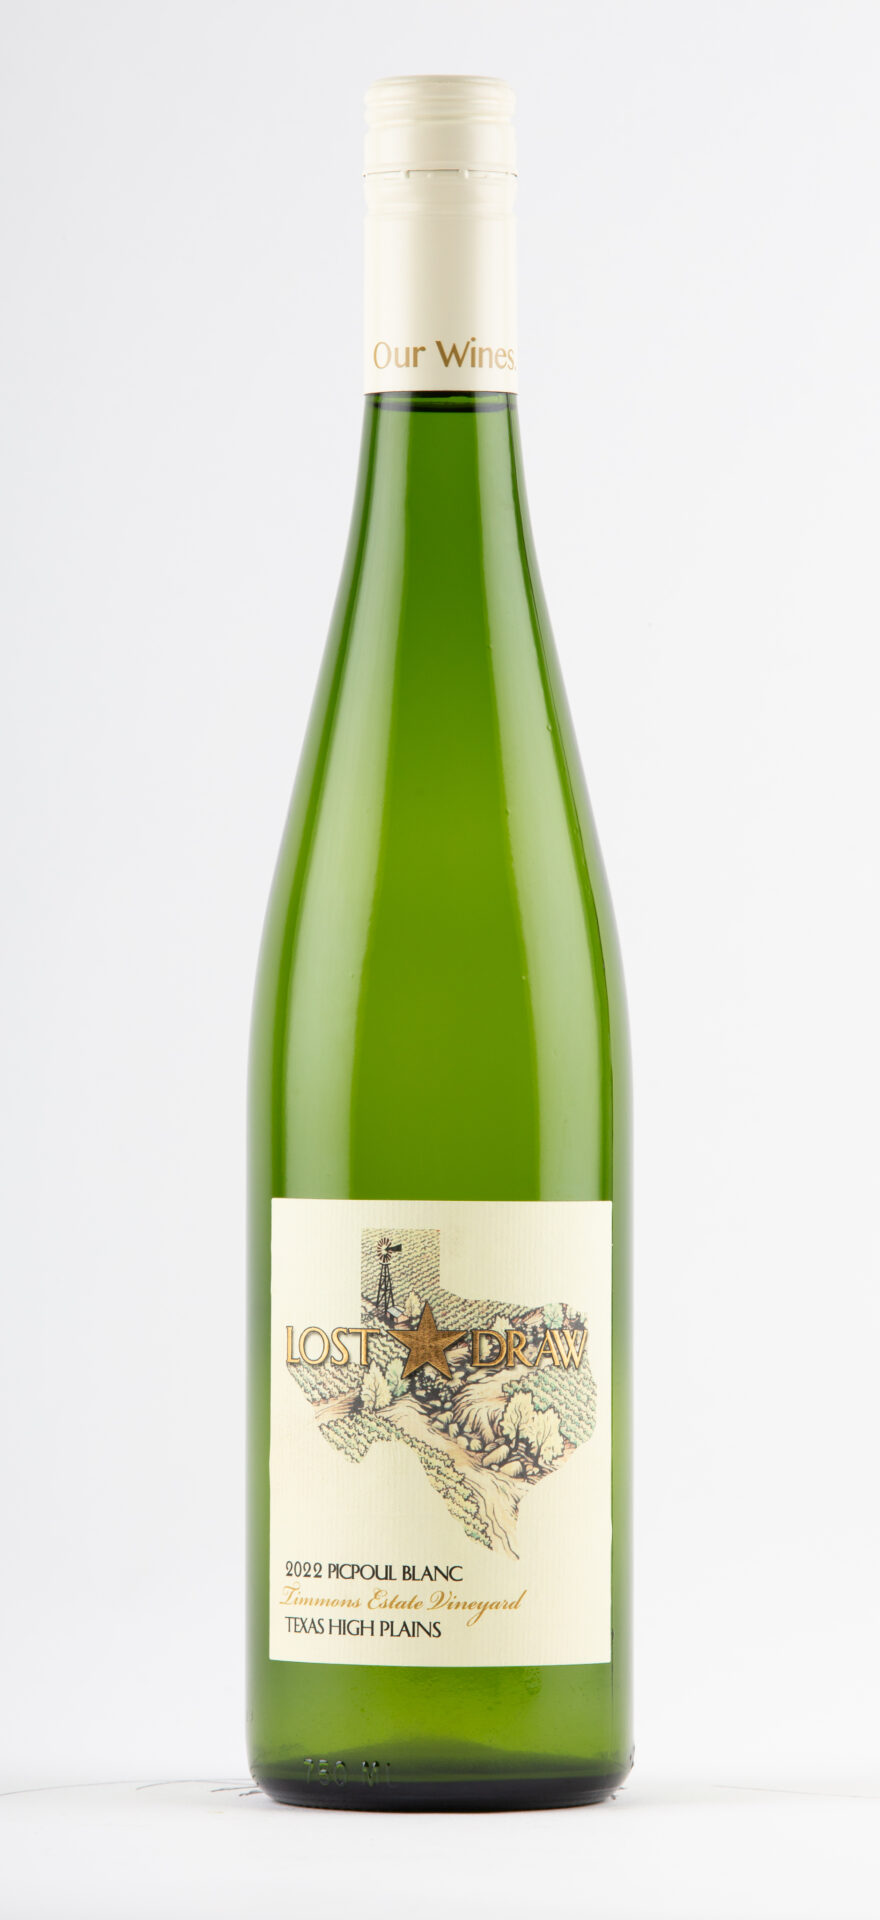 Bottle of Picpoul Blanc Timmons Estate Vineyard, description and wine pairing offered